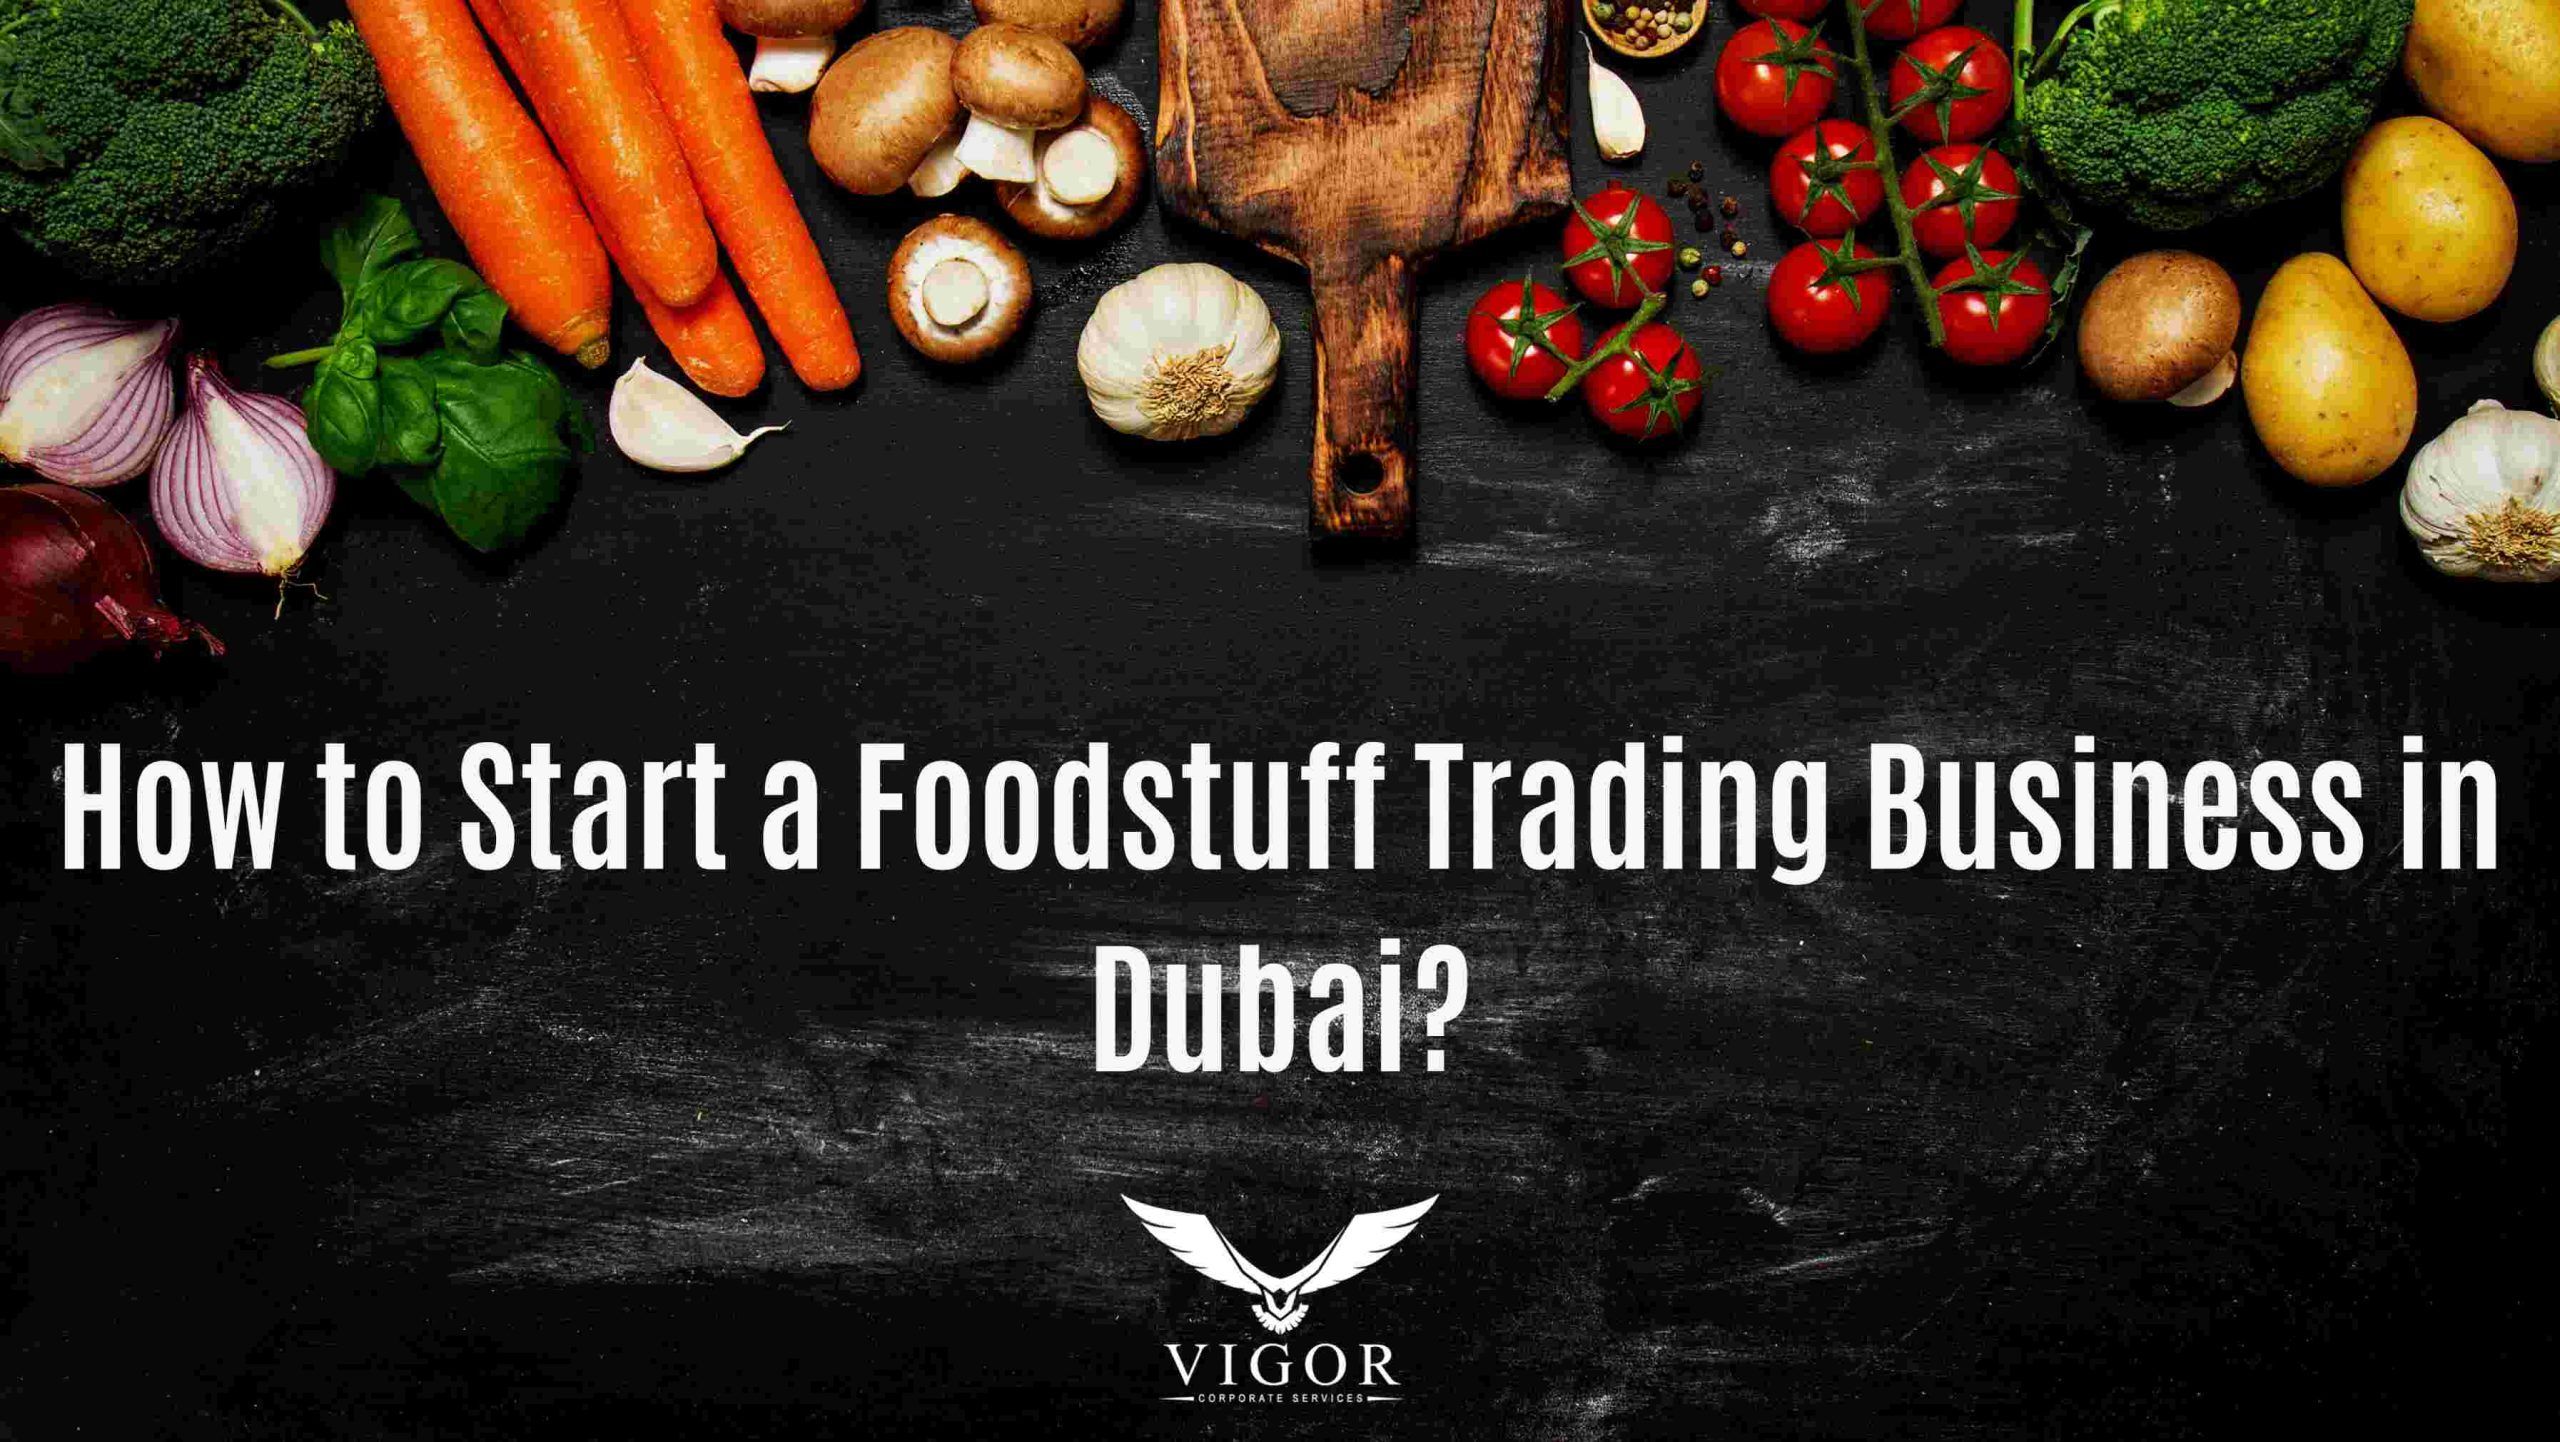 How to Start a Foodstuff Trading Business in Dubai?